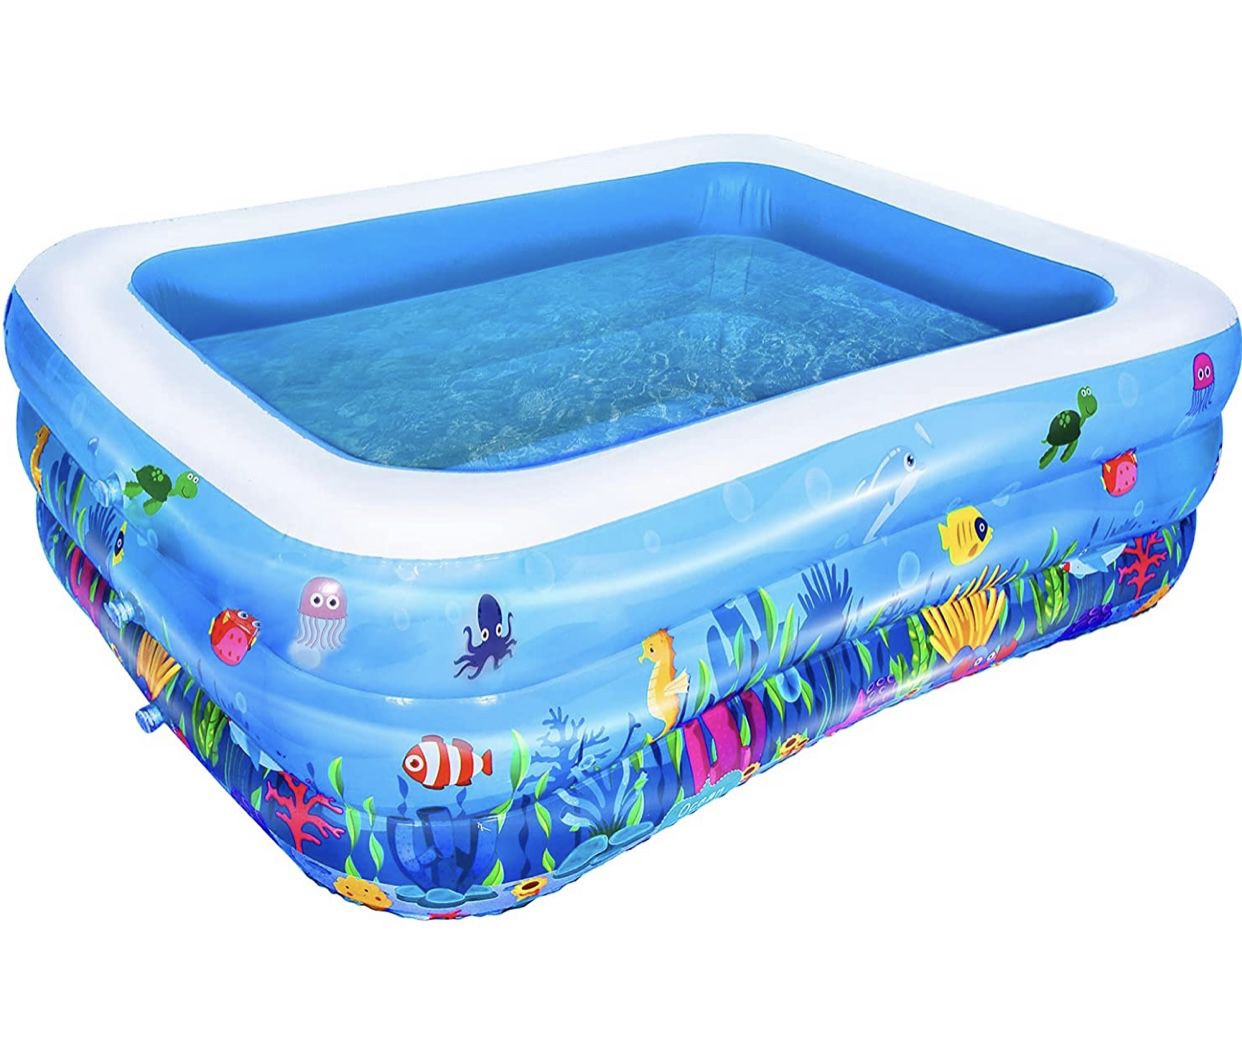 Inflatable Swimming Pool 70.8"x 55.1"x 23.6